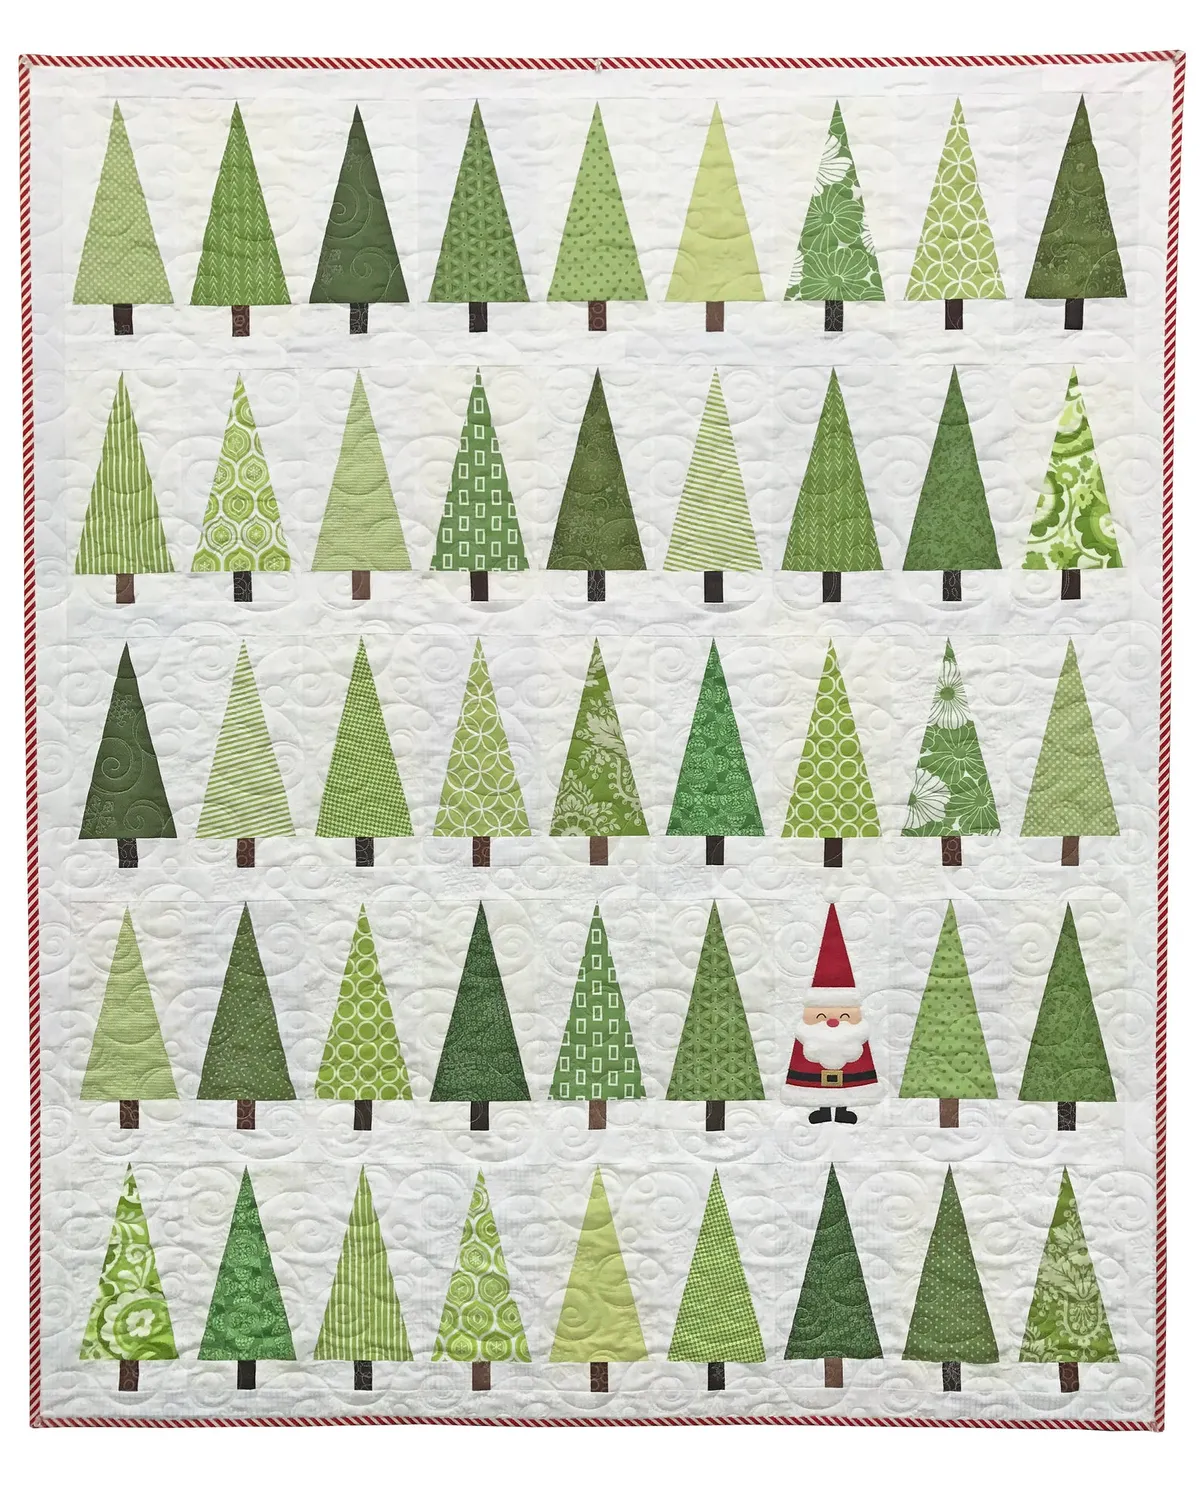 Christmas Tree quilt pattern